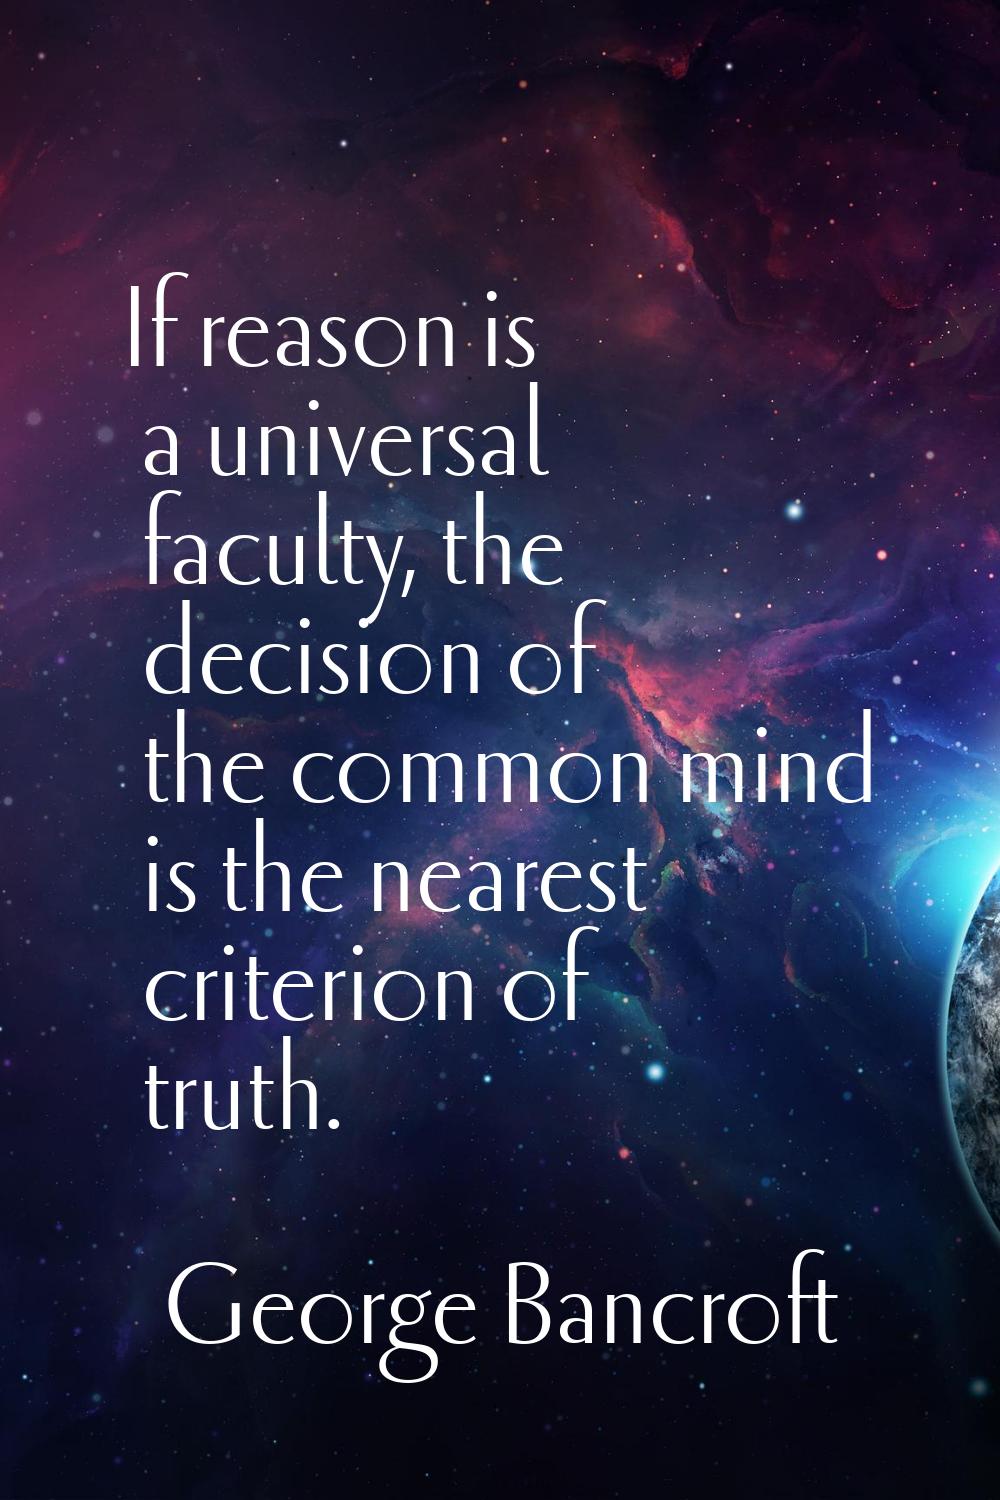 If reason is a universal faculty, the decision of the common mind is the nearest criterion of truth